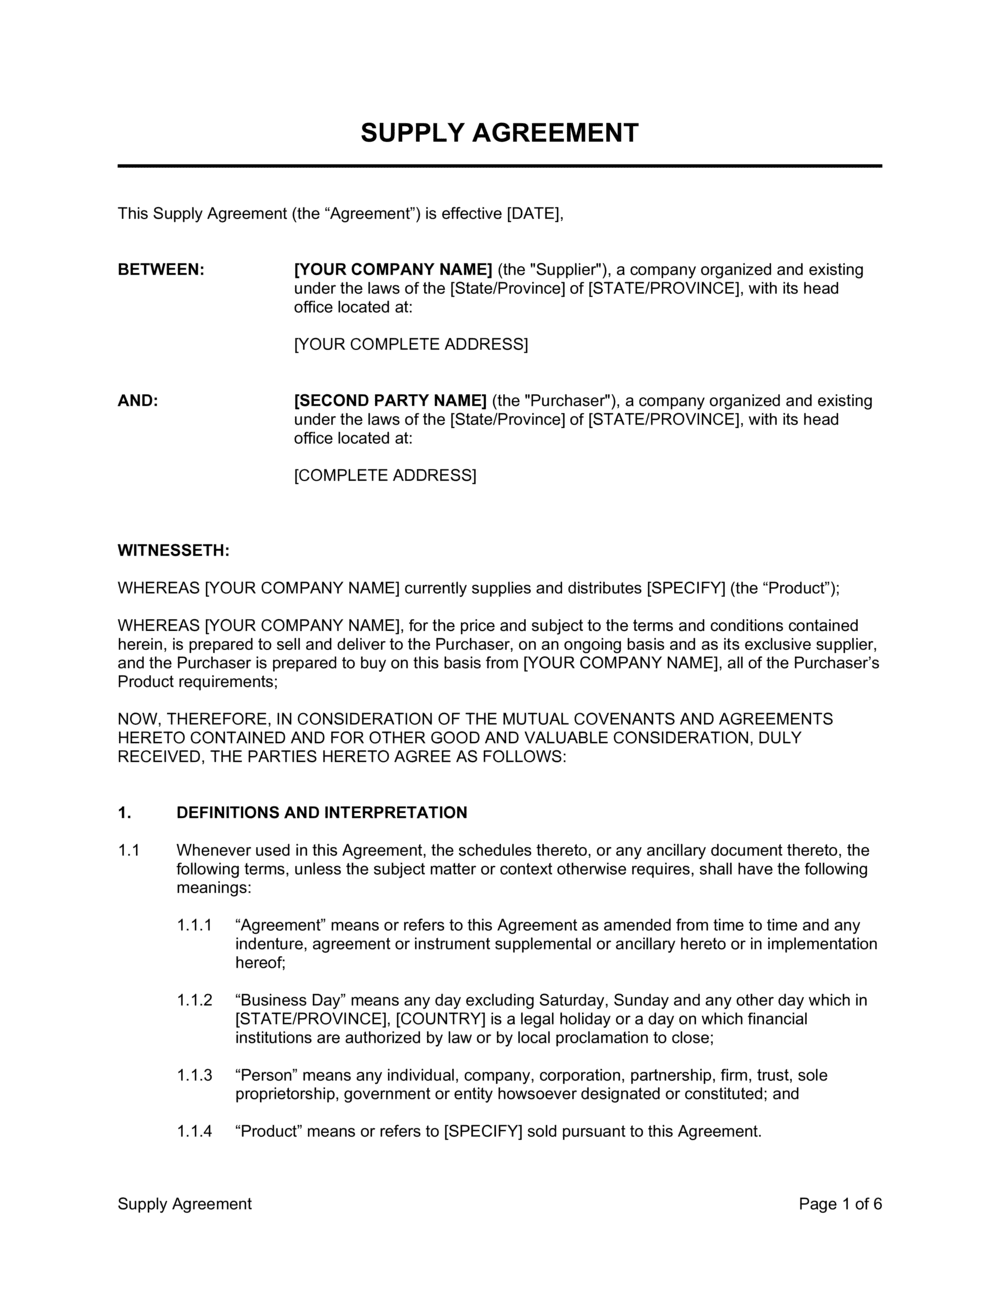 Supply Agreement Template  by Business-in-a-Box™ Within free contract manufacturing agreements templates